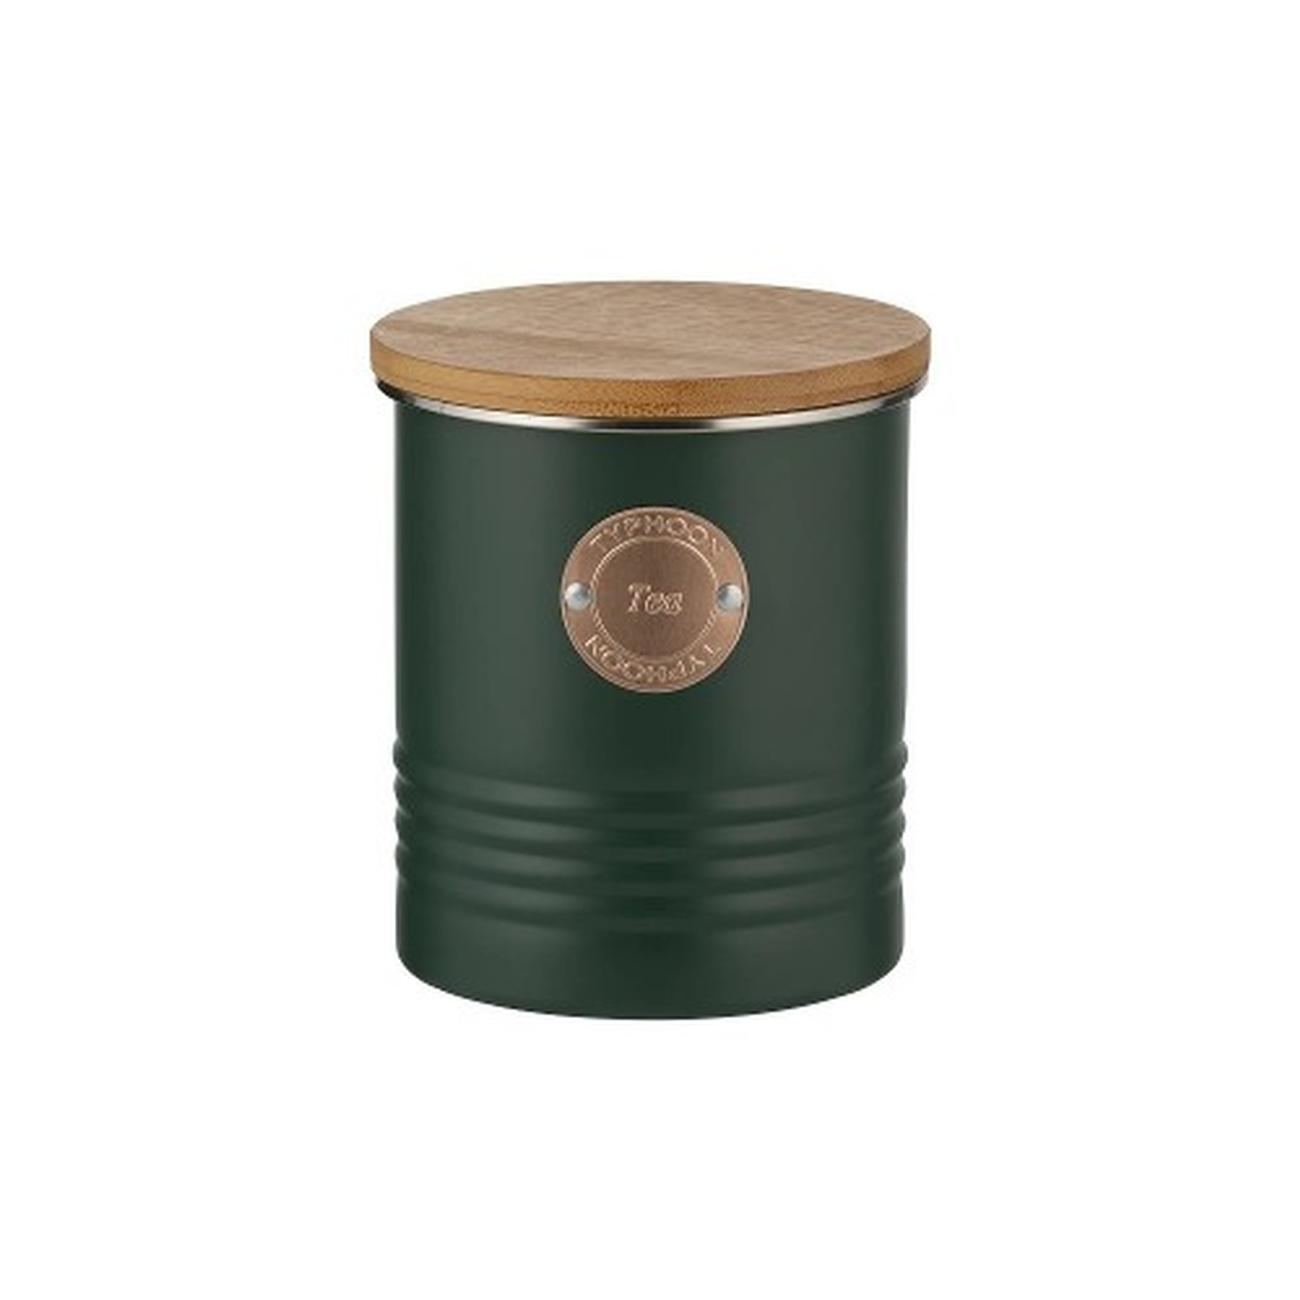 https://www.thekitchenwhisk.ie/contentfiles/productImages/Large/Typhoon-Living-Tea-Storage-Canister-Green-1L.jpg